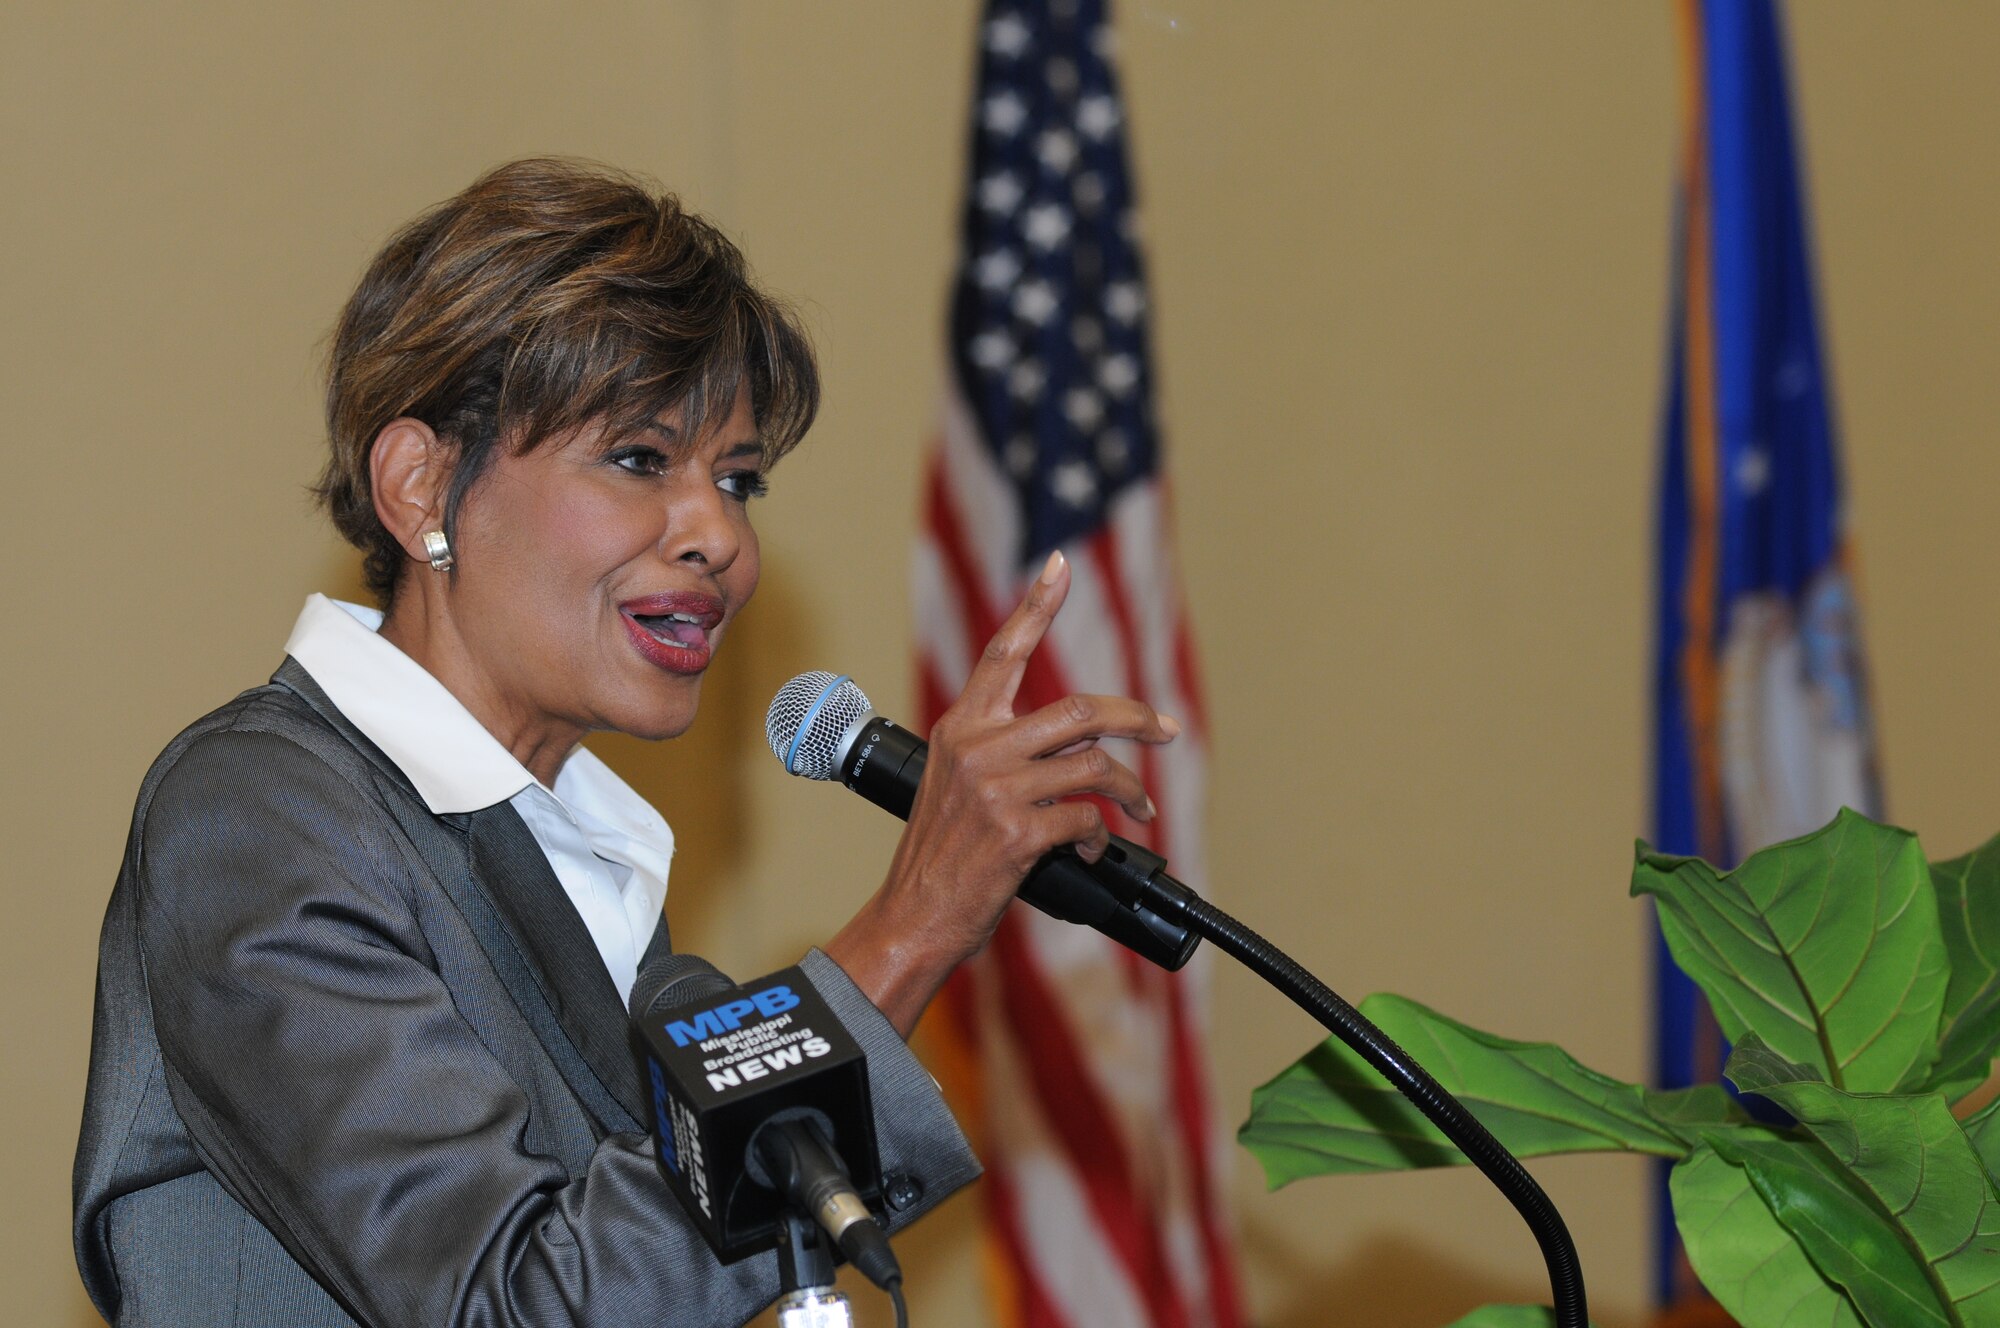 Sally-Ann Roberts was the guest speaker for the Black History month luncheon, Feb. 2, 2012 at the Bay Breeze Event Center, Keesler Air Force Base, Miss.  The luncheon was hosted by the African American Heritage Committee.  Roberts, morning news anchor at WWL-TV in New Orleans, is the daughter of the late Col. Lawrence Roberts, a Tuskegee Airman for whom the Roberts Consolidated Aircraft Maintenance Facility is named.  (U.S. Air Force photo by Kemberly Groue)